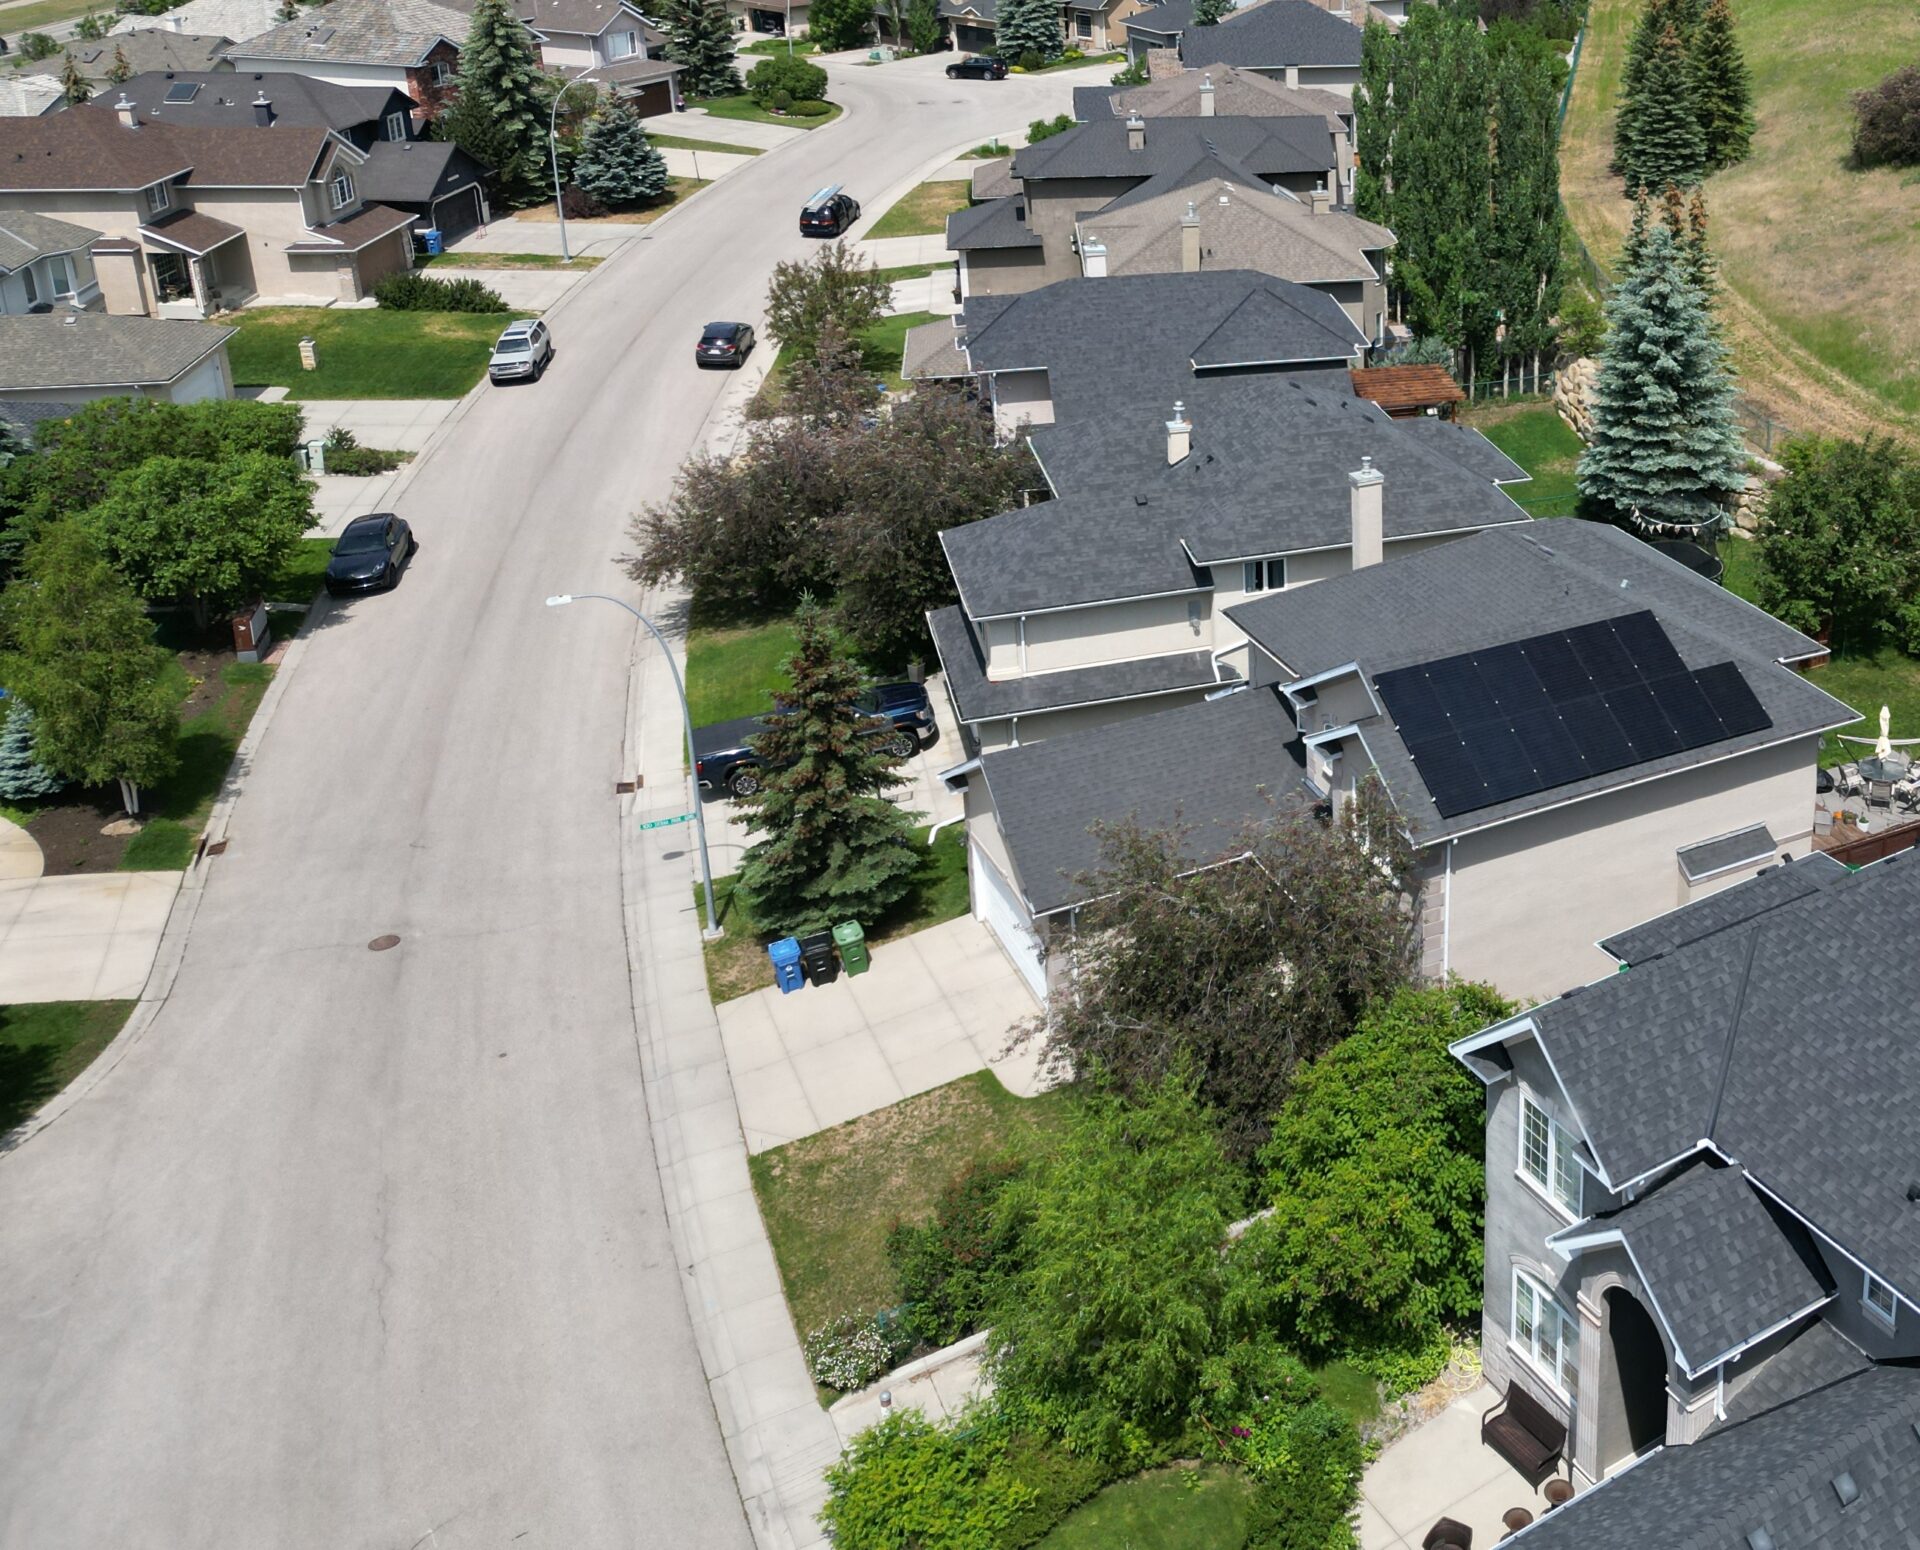 An aerial view of a suburban neighborhood with houses, solar panels on a roof, lush trees, green lawns, and cars on the street.